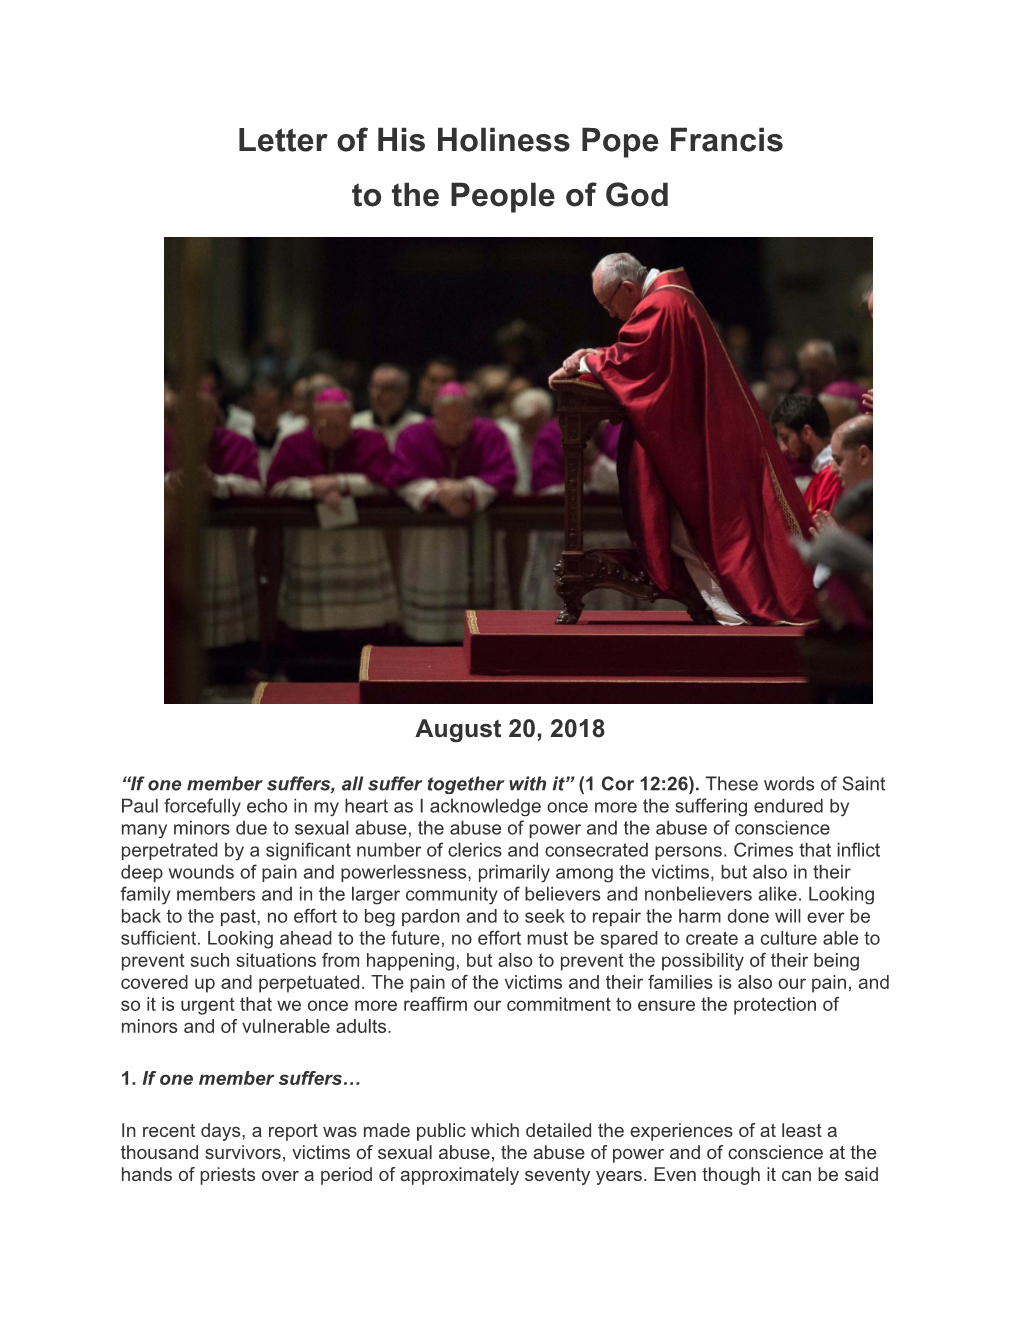 Letter of His Holiness Pope Francis to the People of God